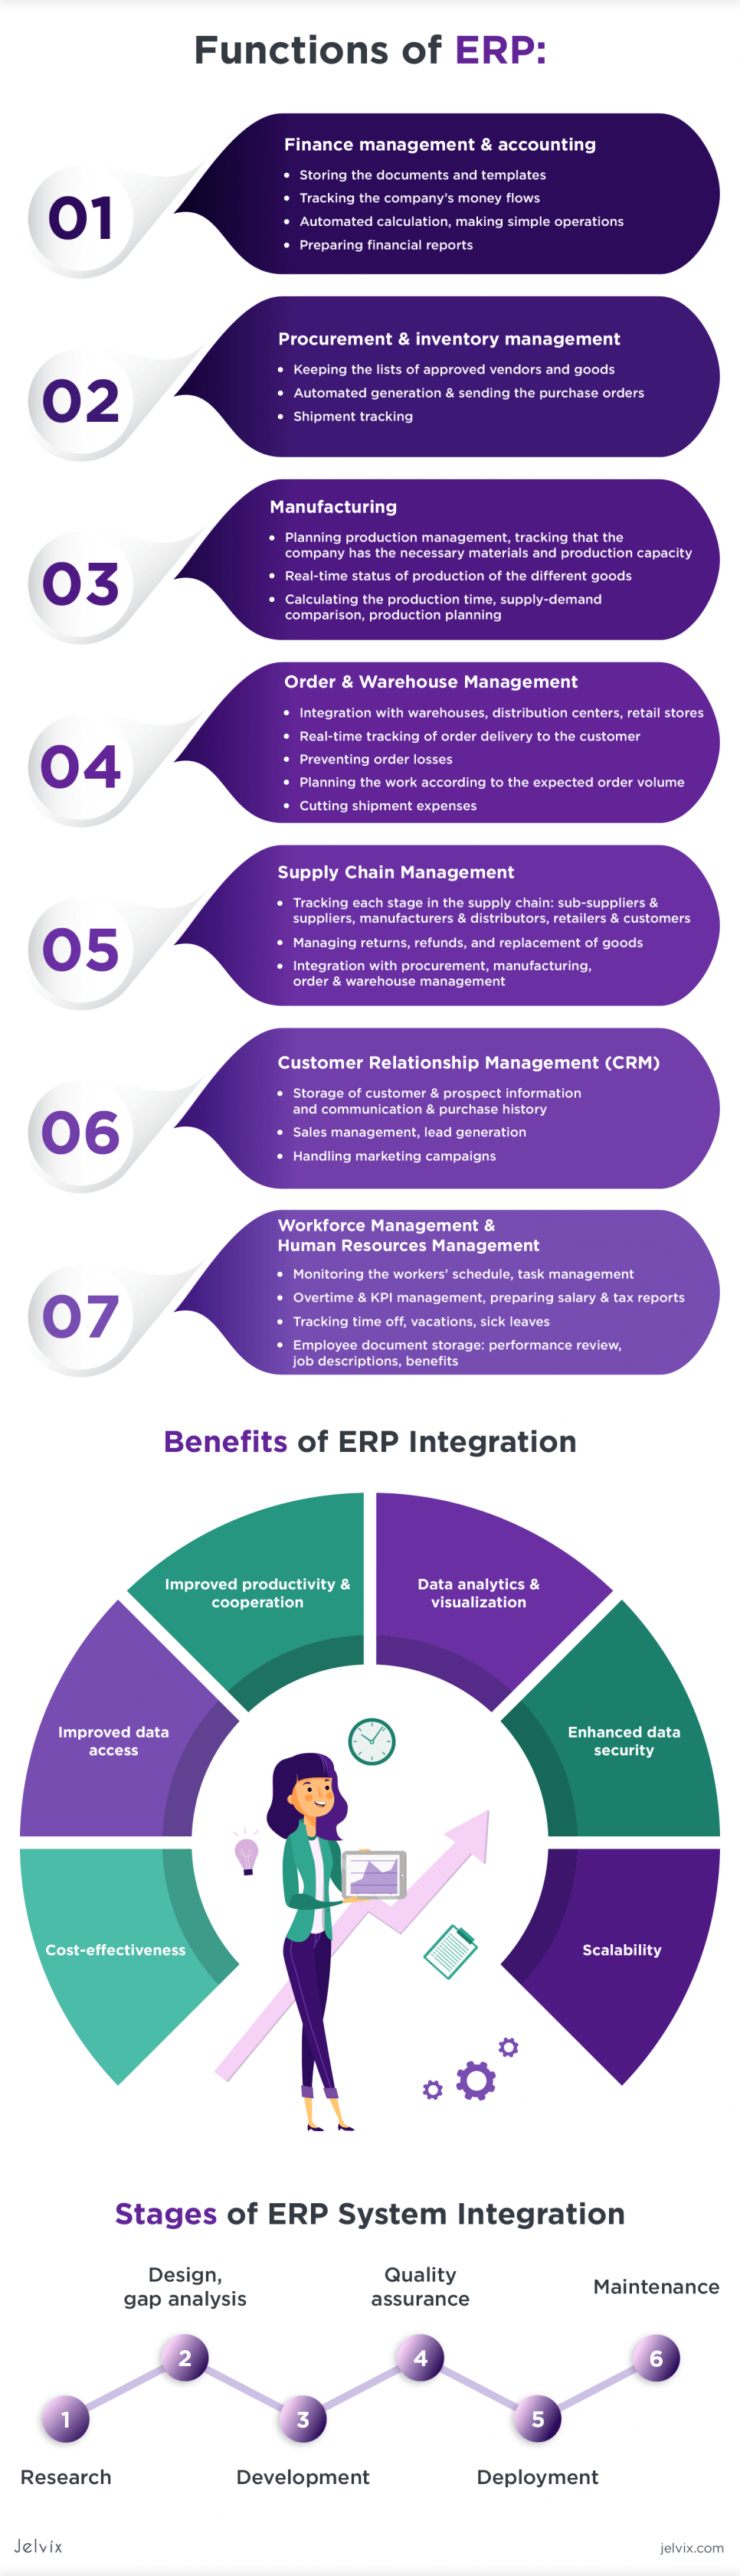 Cloud-based ERP solutions